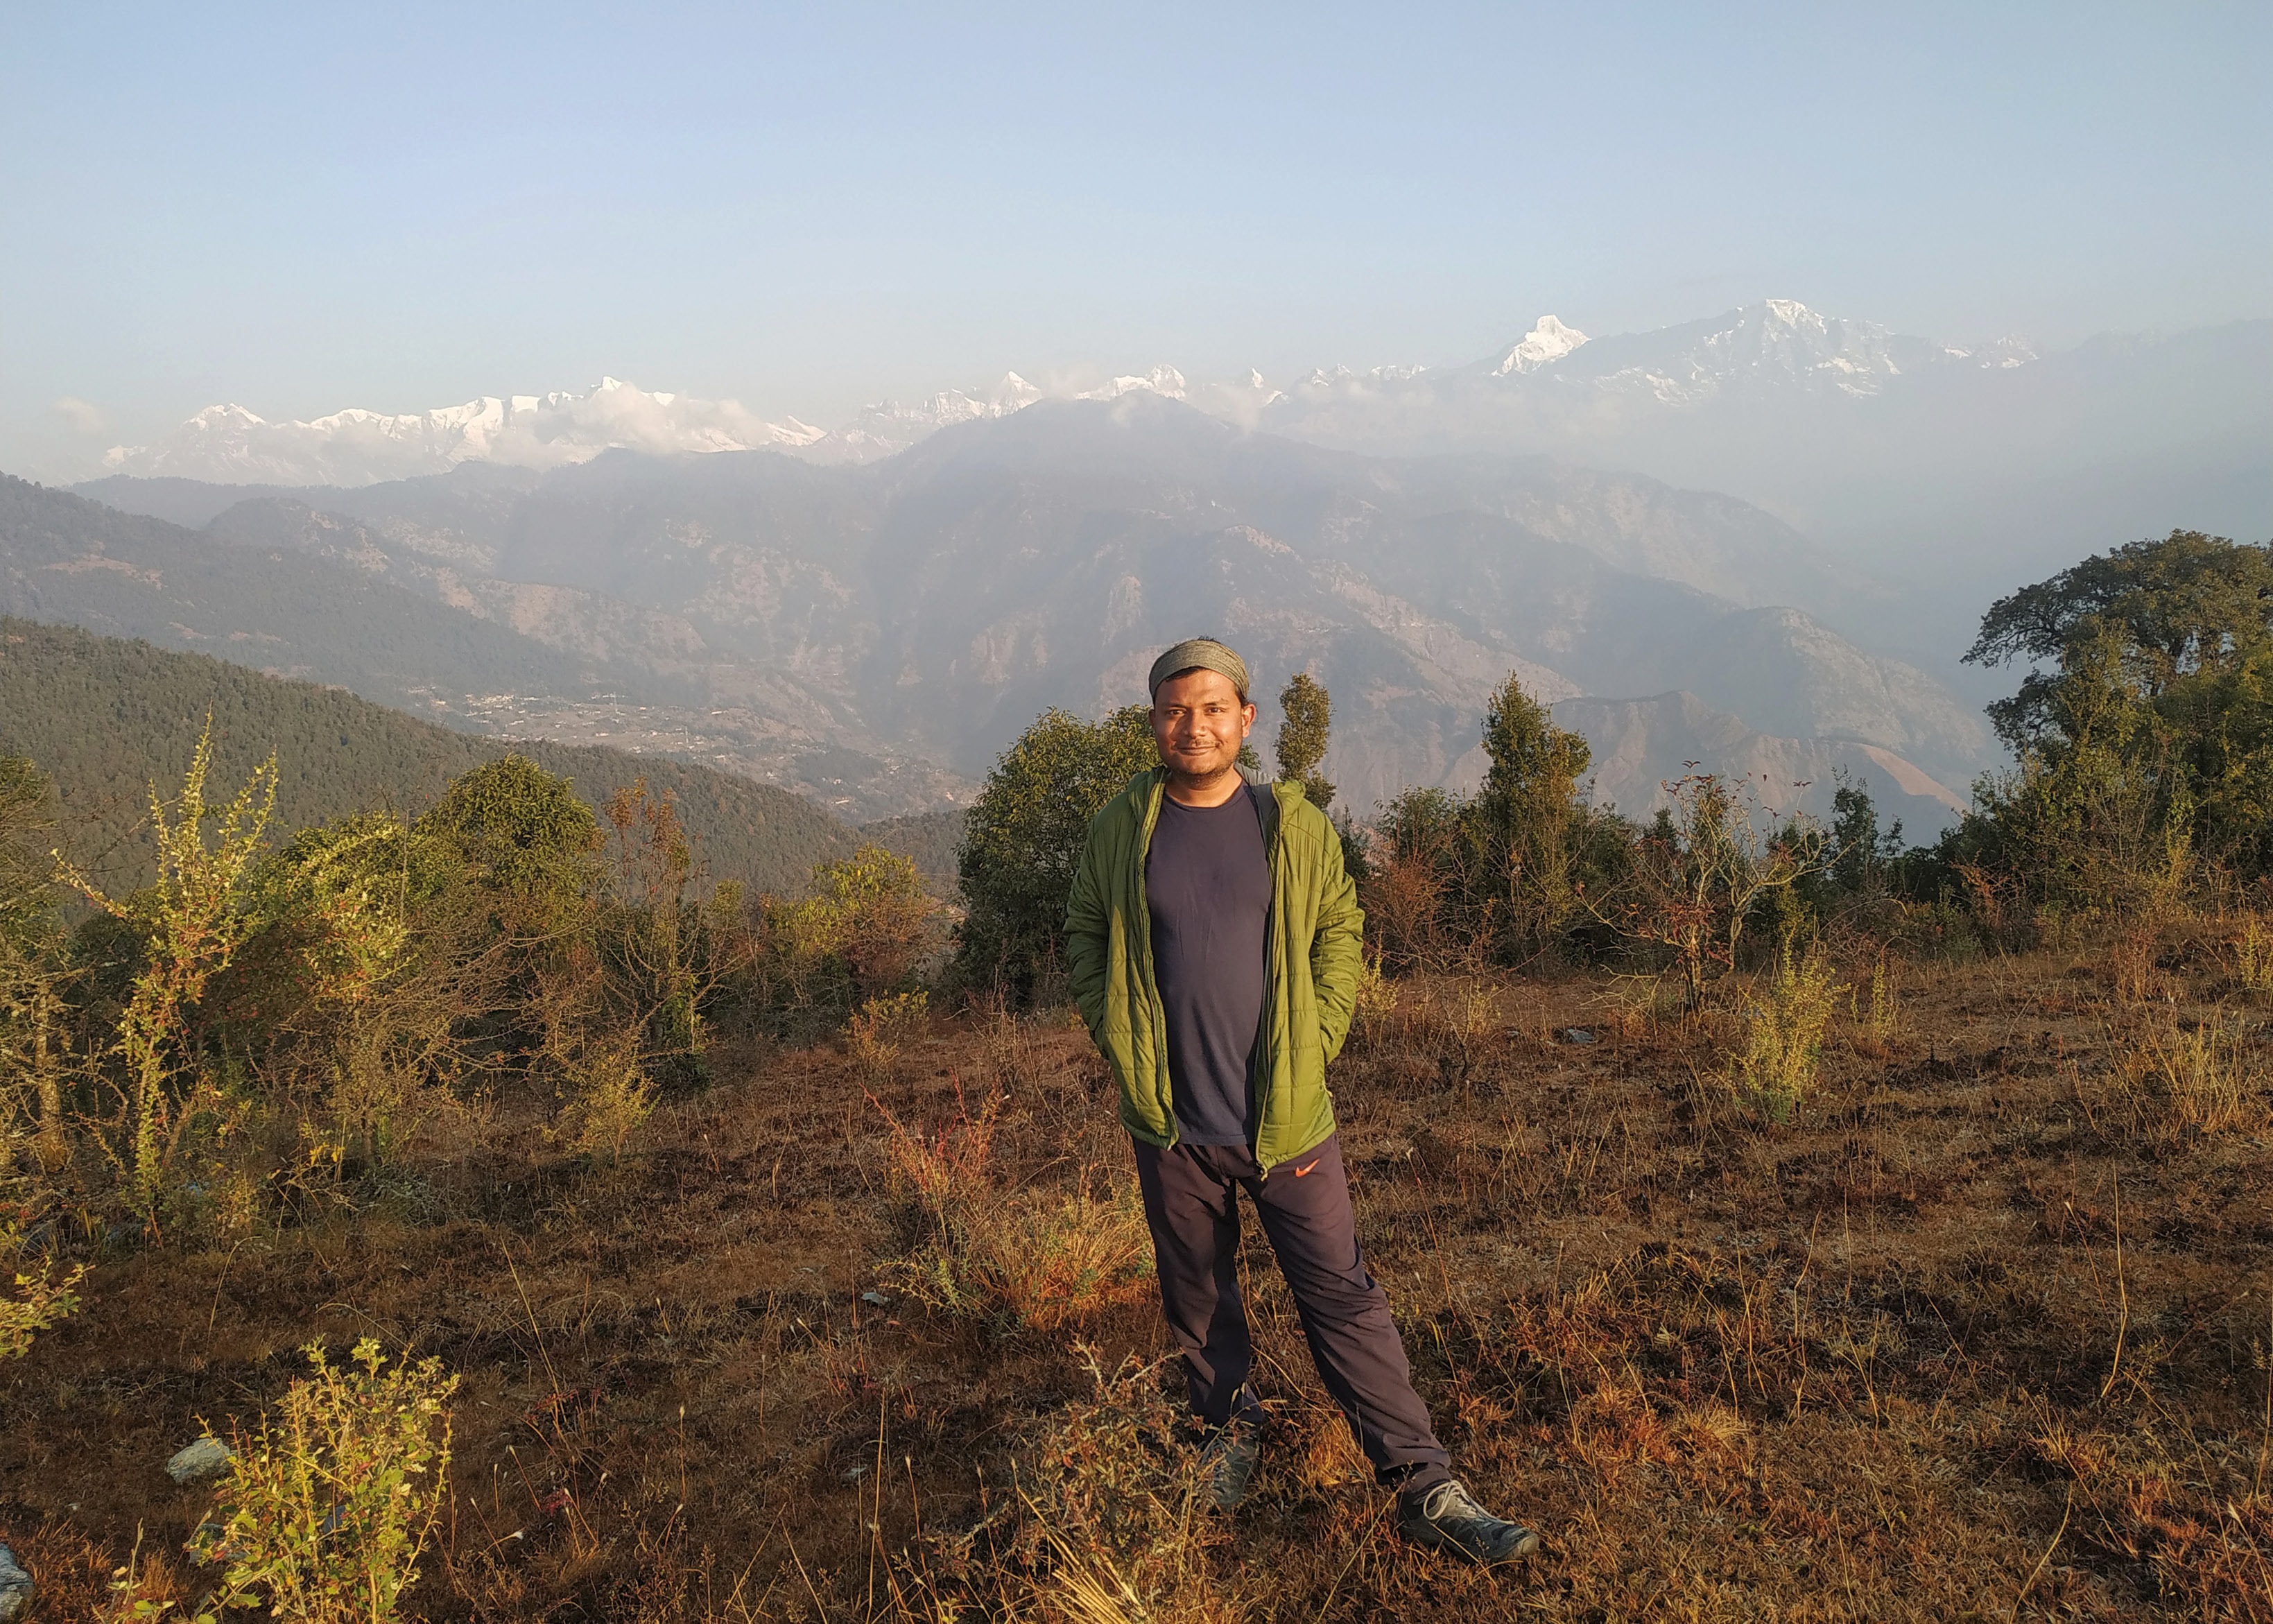 The author writes about his escapades cycling around the Kumaon region